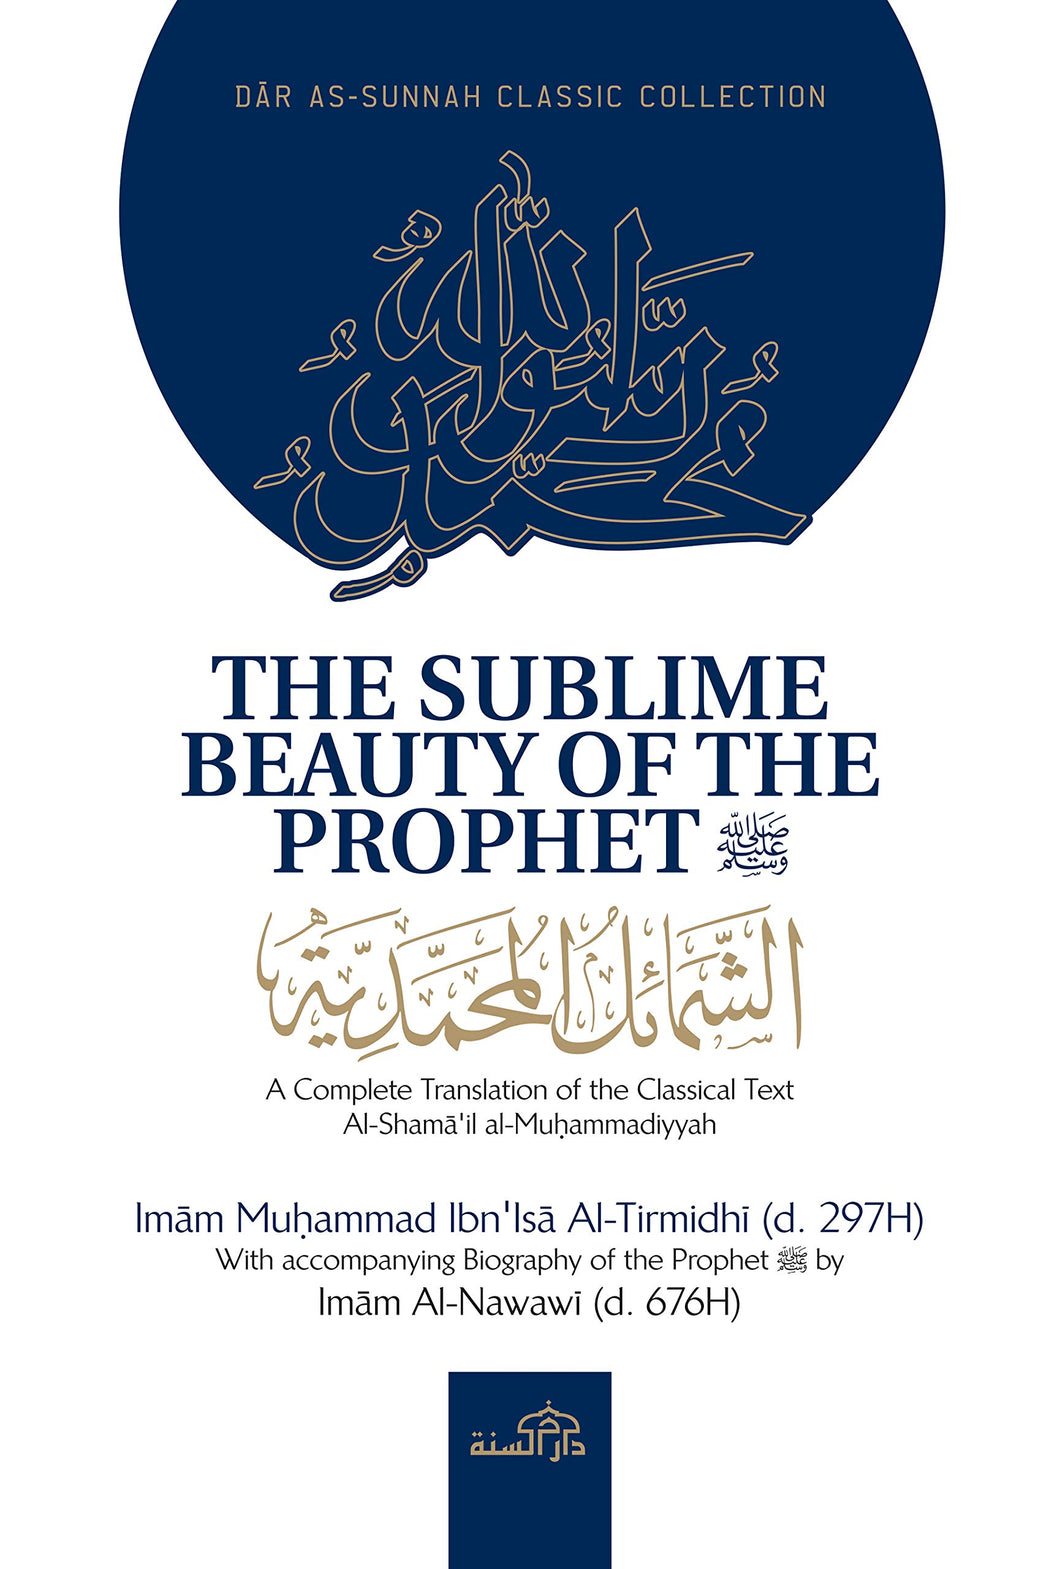 The Sublime Beauty of the Prophet